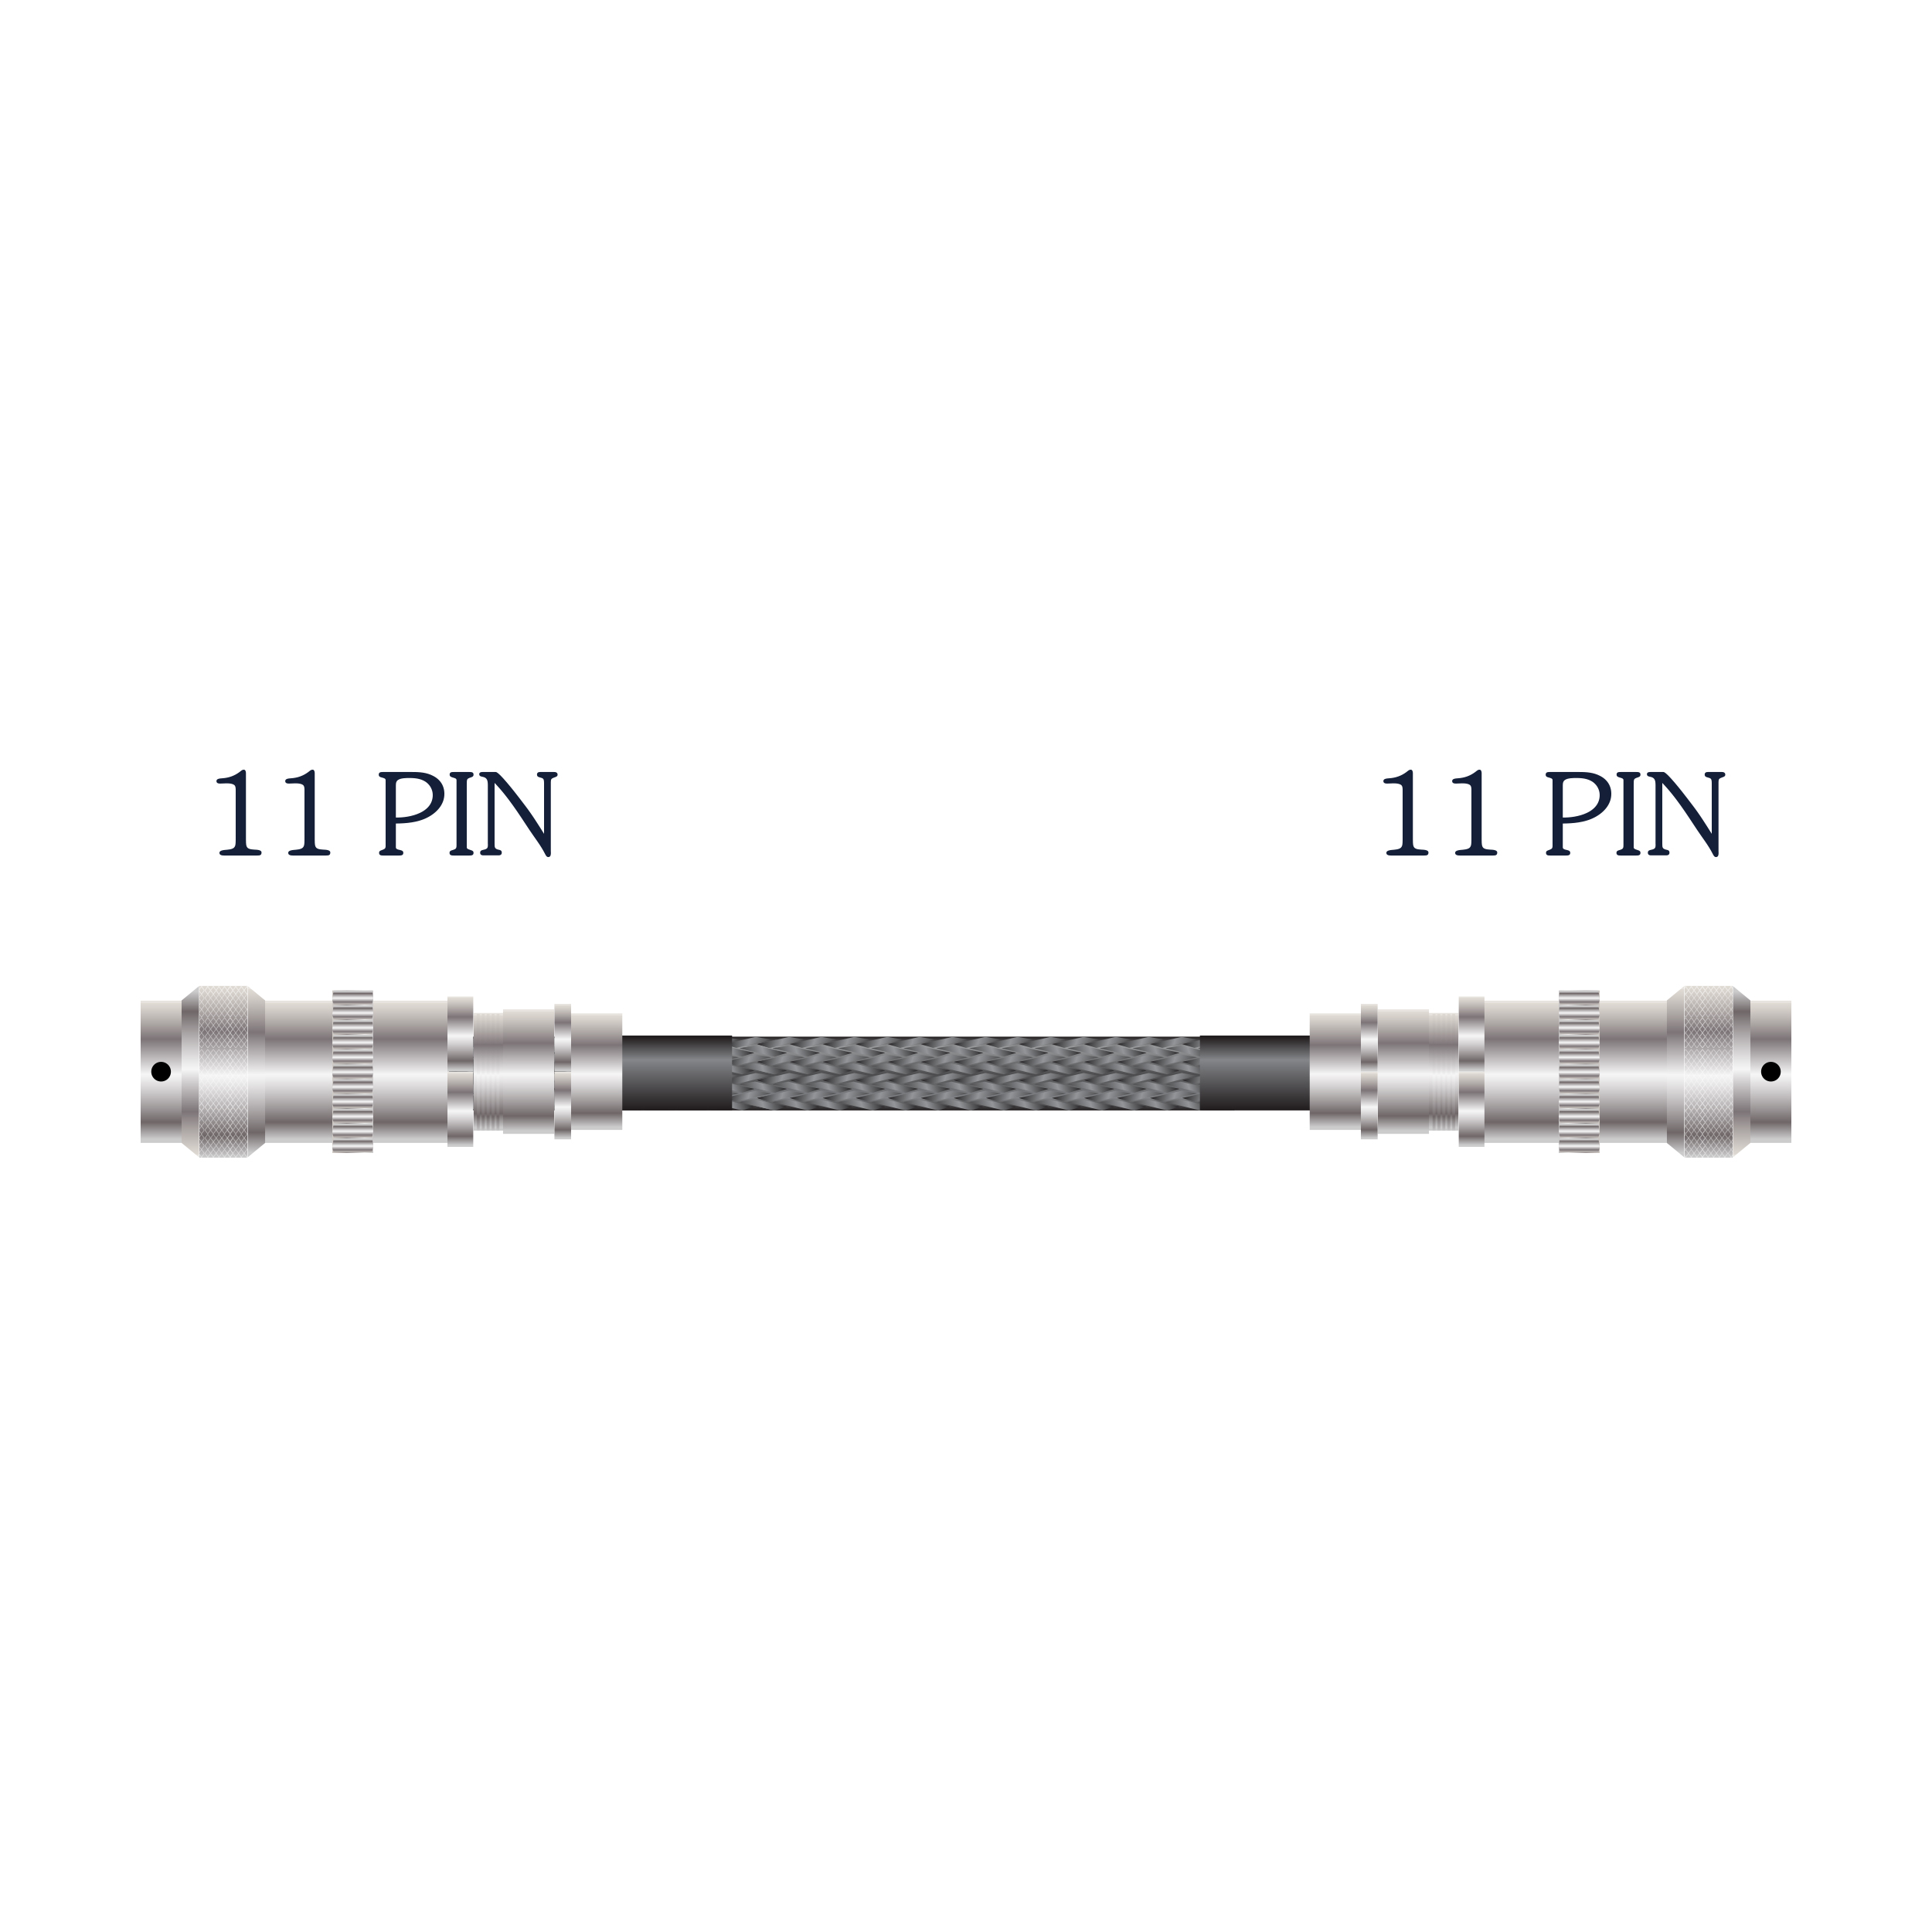 <p align="center">Tyr 2 Specialty 11 Pin Cable</p>